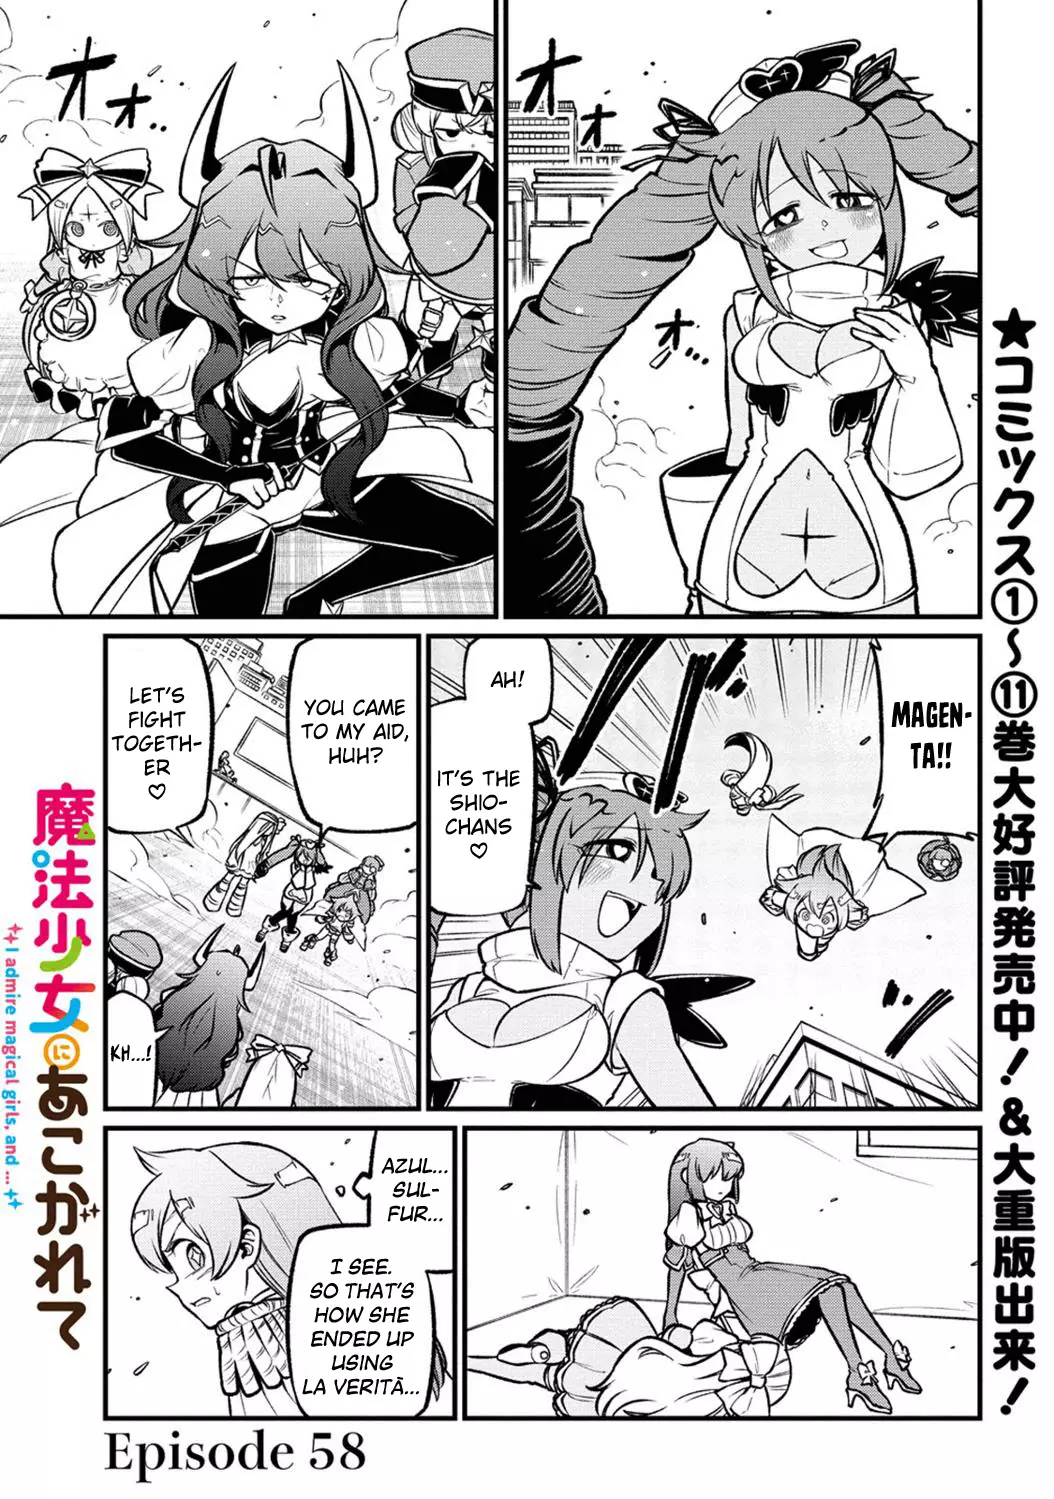 Looking Up To Magical Girls - 58 page 1-8c906442